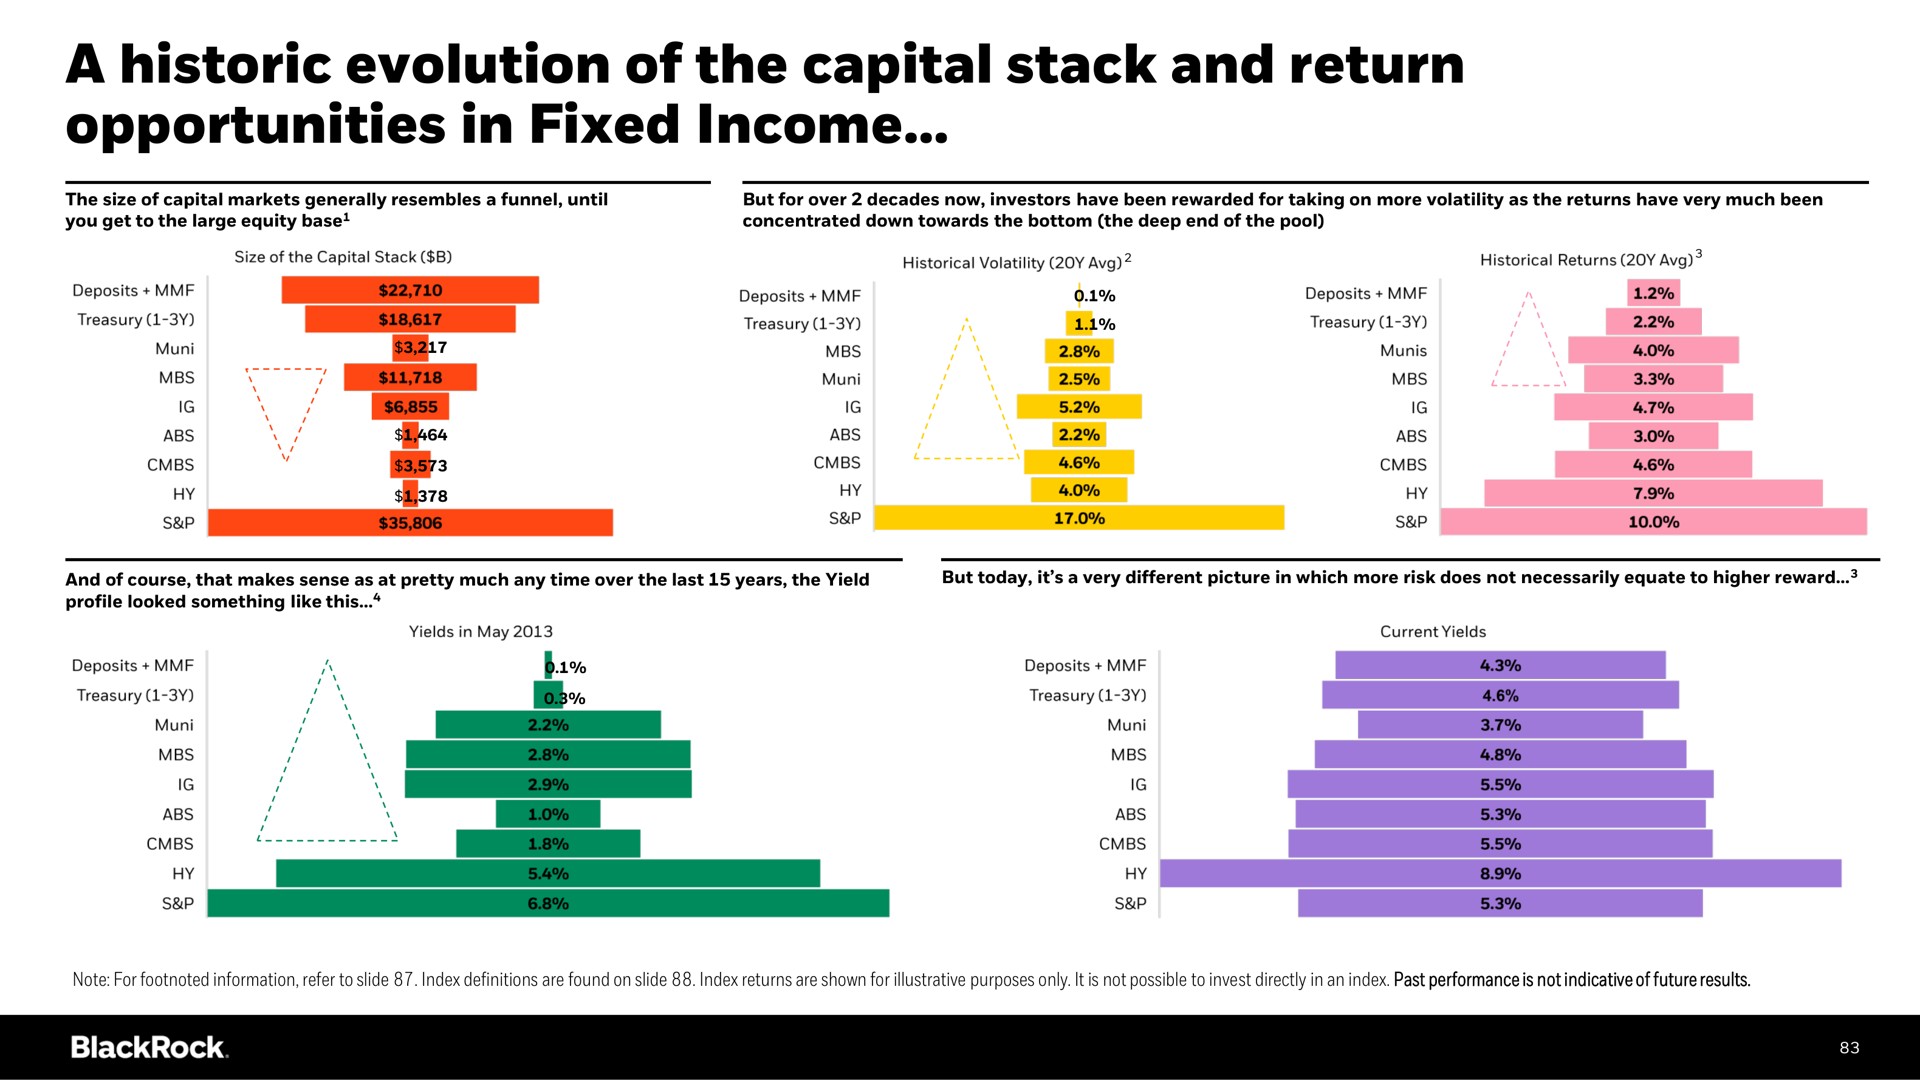 a historic evolution of the capital stack and return opportunities in fixed income | BlackRock